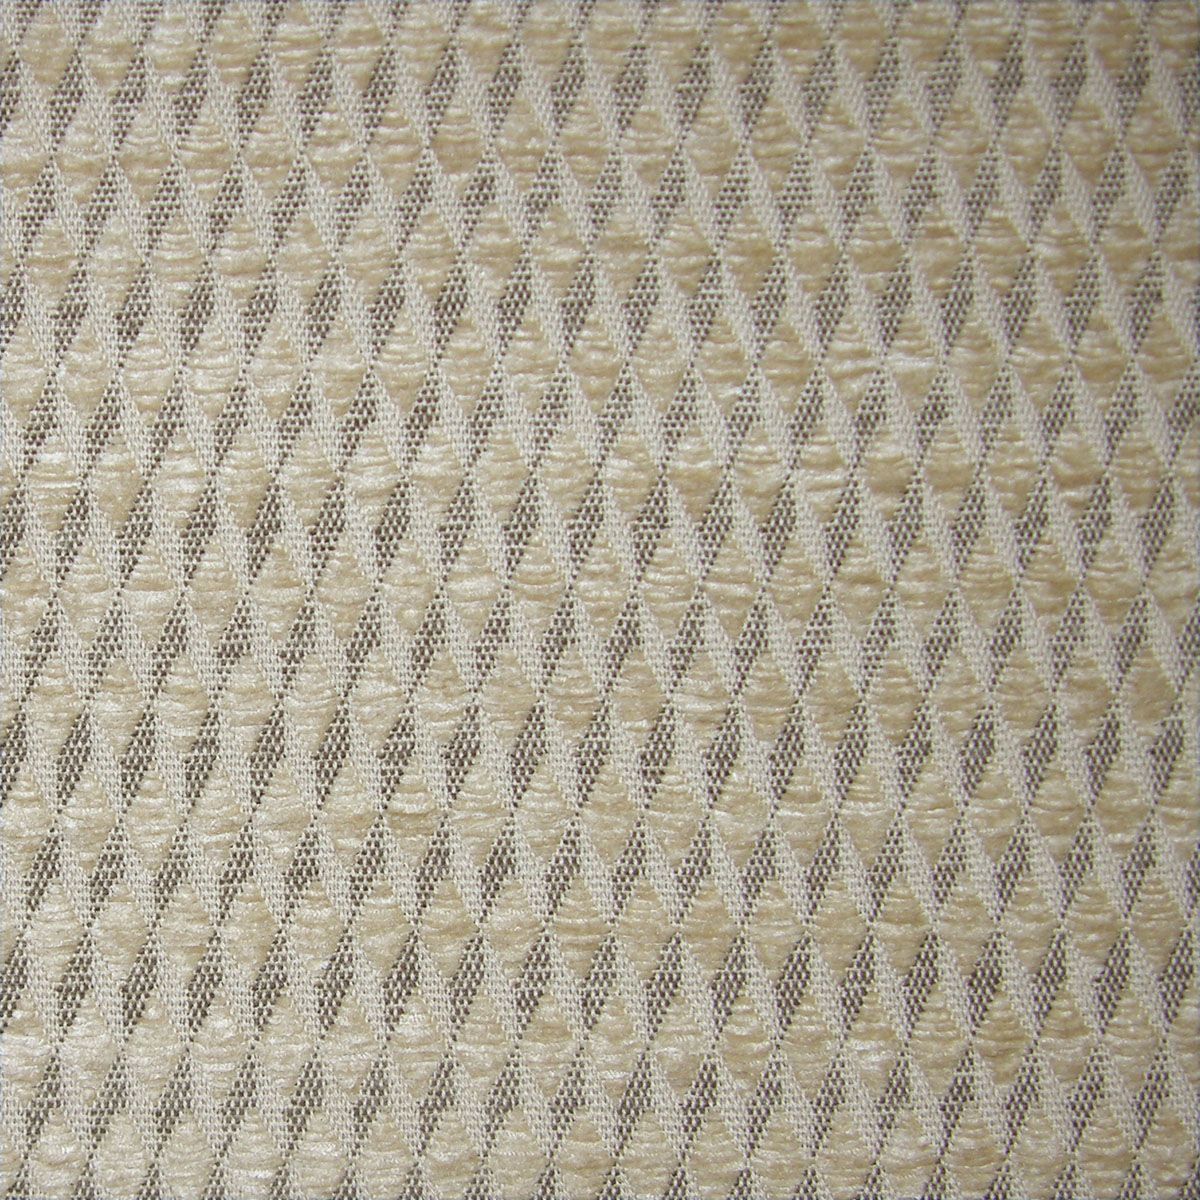 Cimarron fabric in sand color - pattern number PW 00014100 - by Scalamandre in the Old World Weavers collection